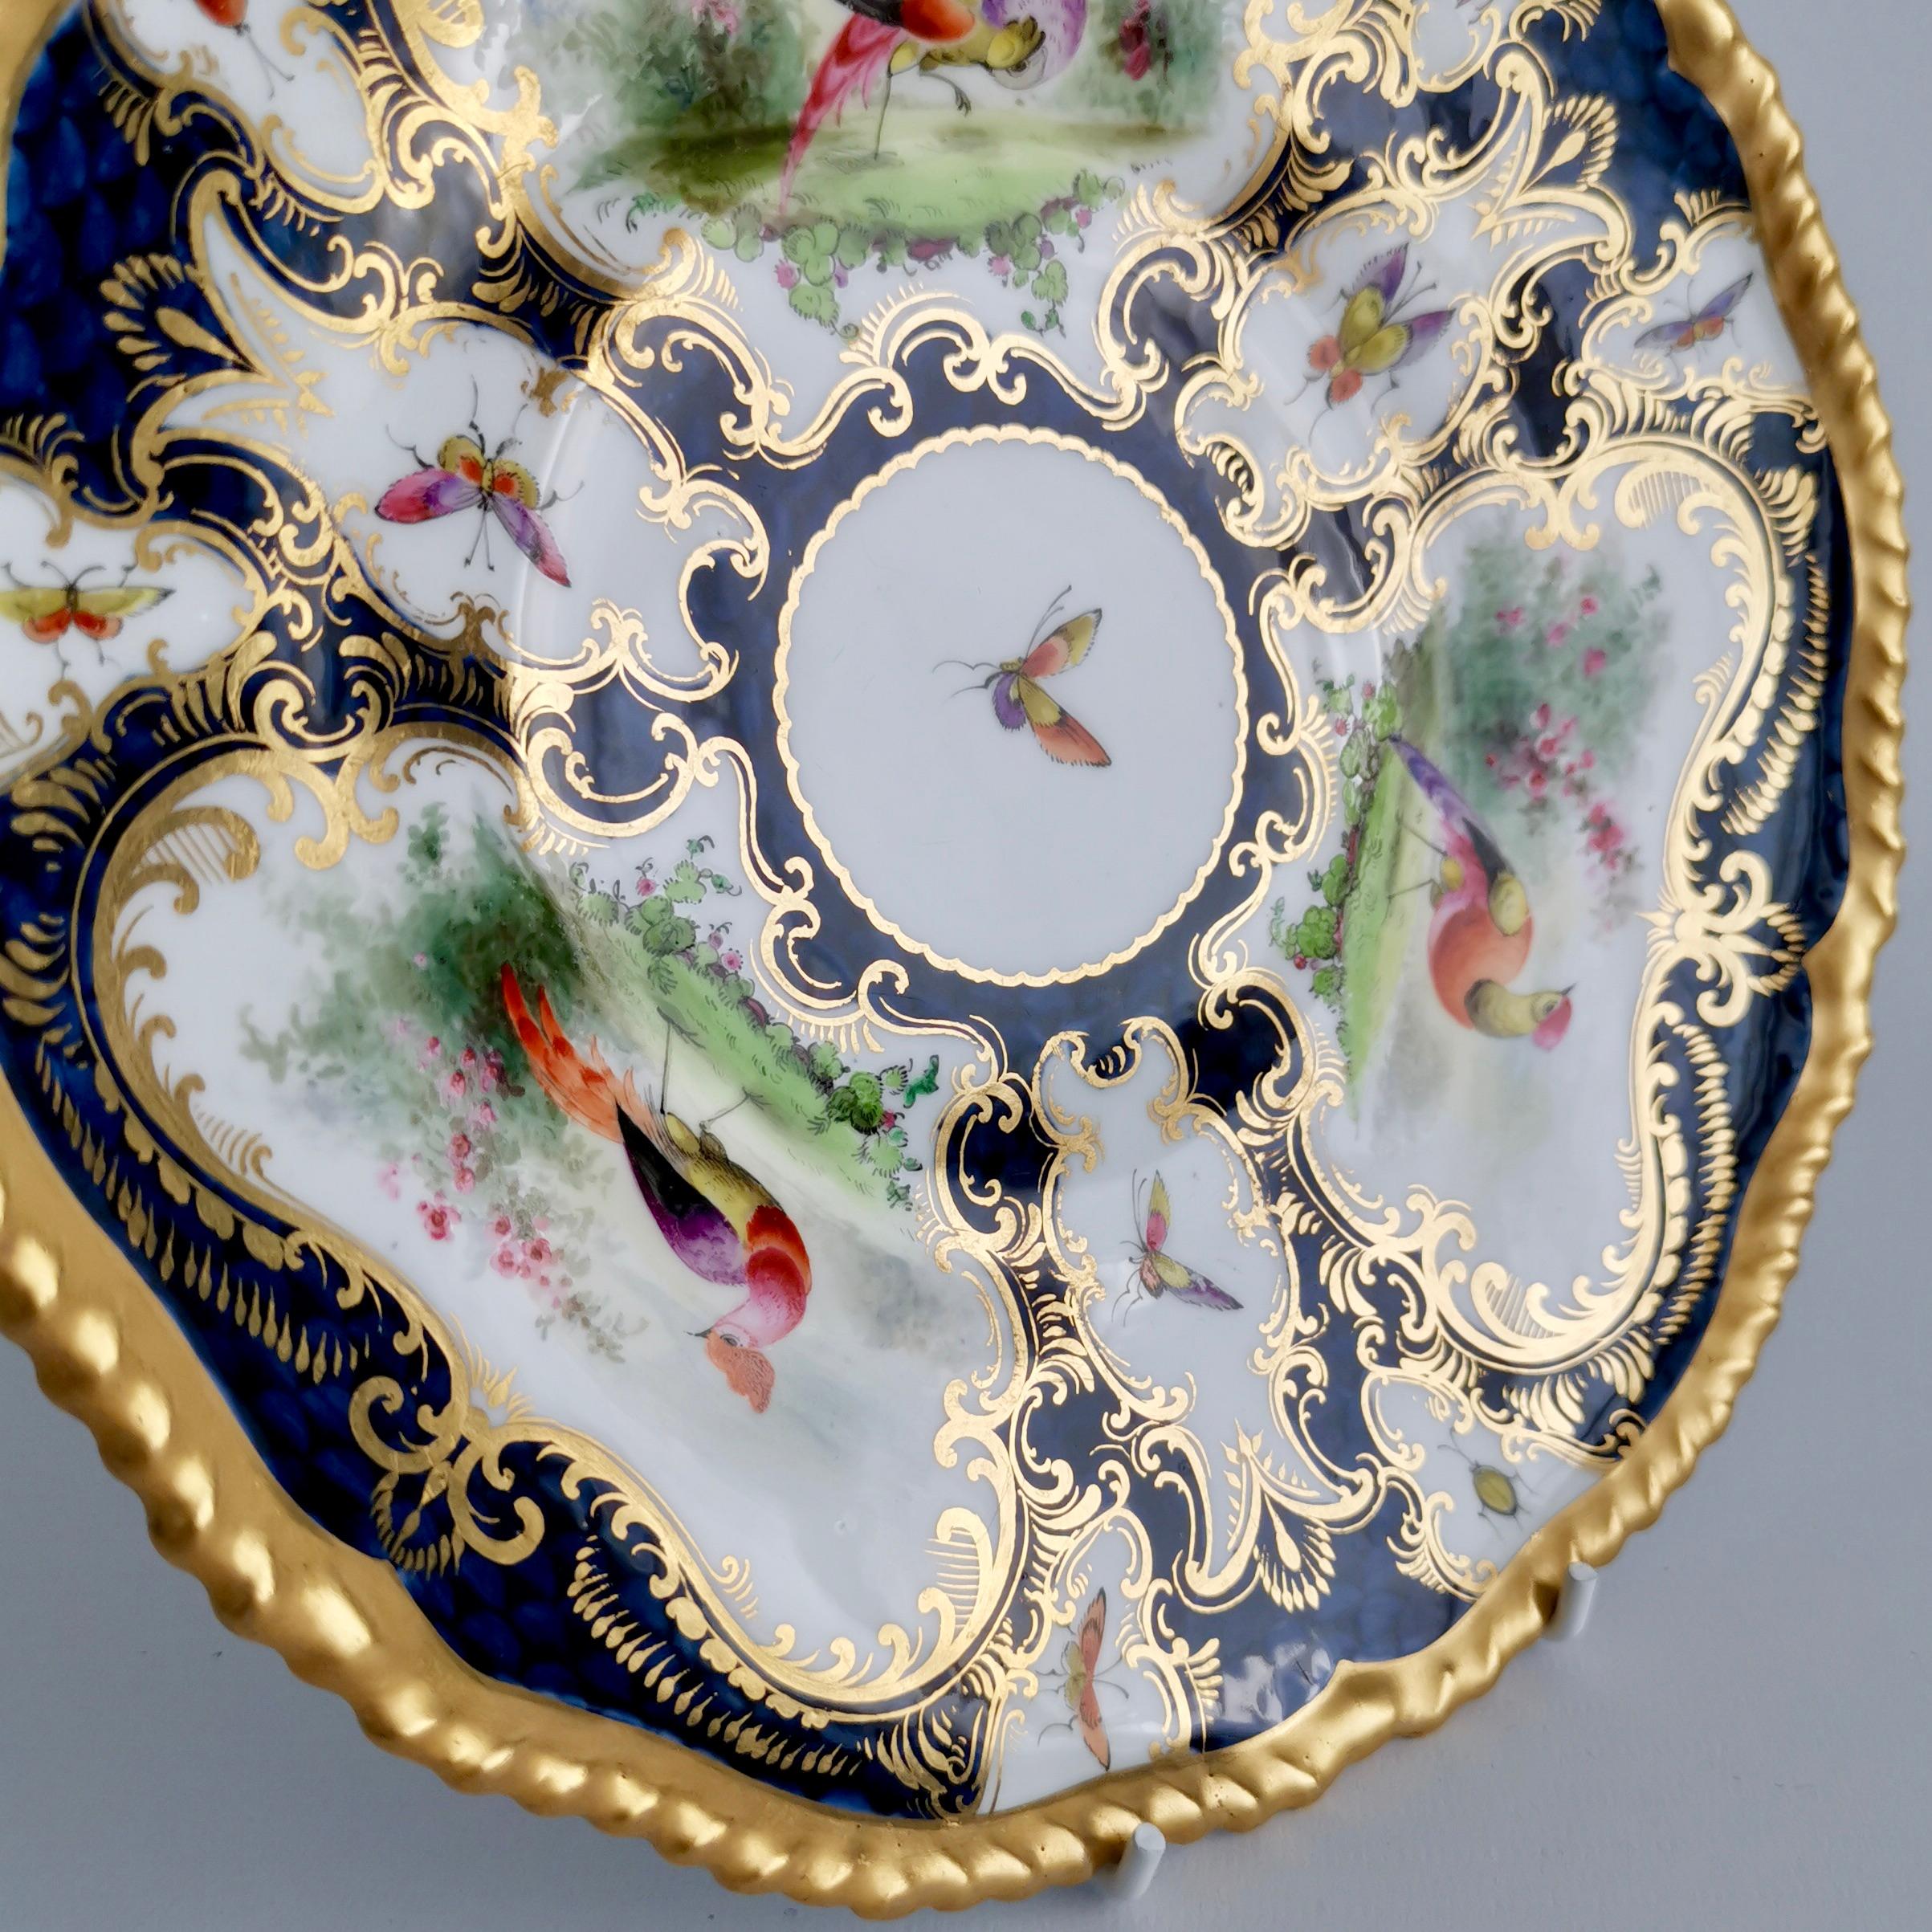 Late 19th Century Grainger Worcester Porcelain Plate, Blue Scale, Sevres Birds & Insects, 1899 '2'